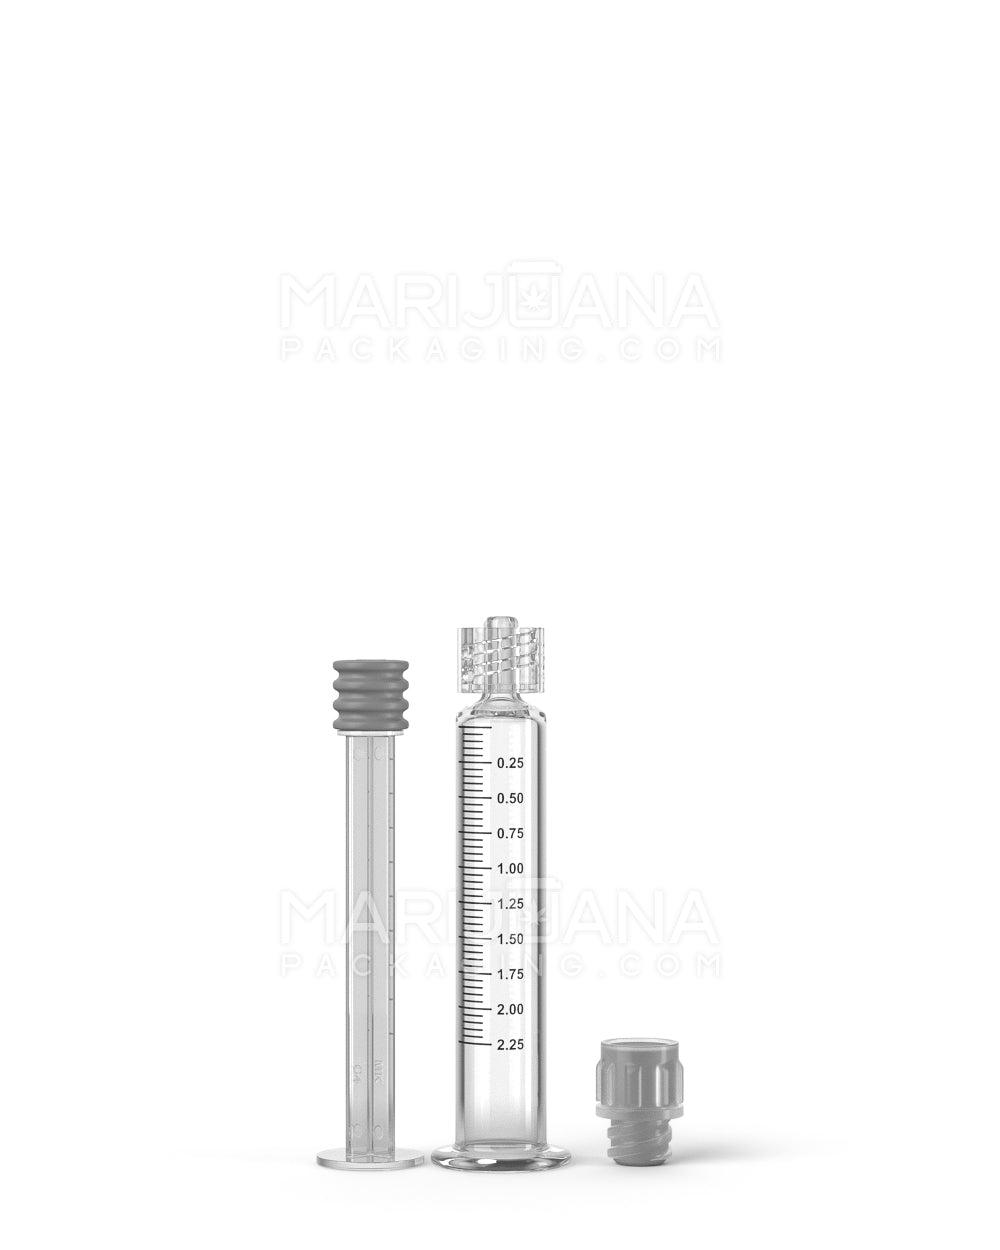 Luer Lock | Glass Dab Applicator Syringes | 2.25mL - 0.25mL Increments - 100 Count - 3